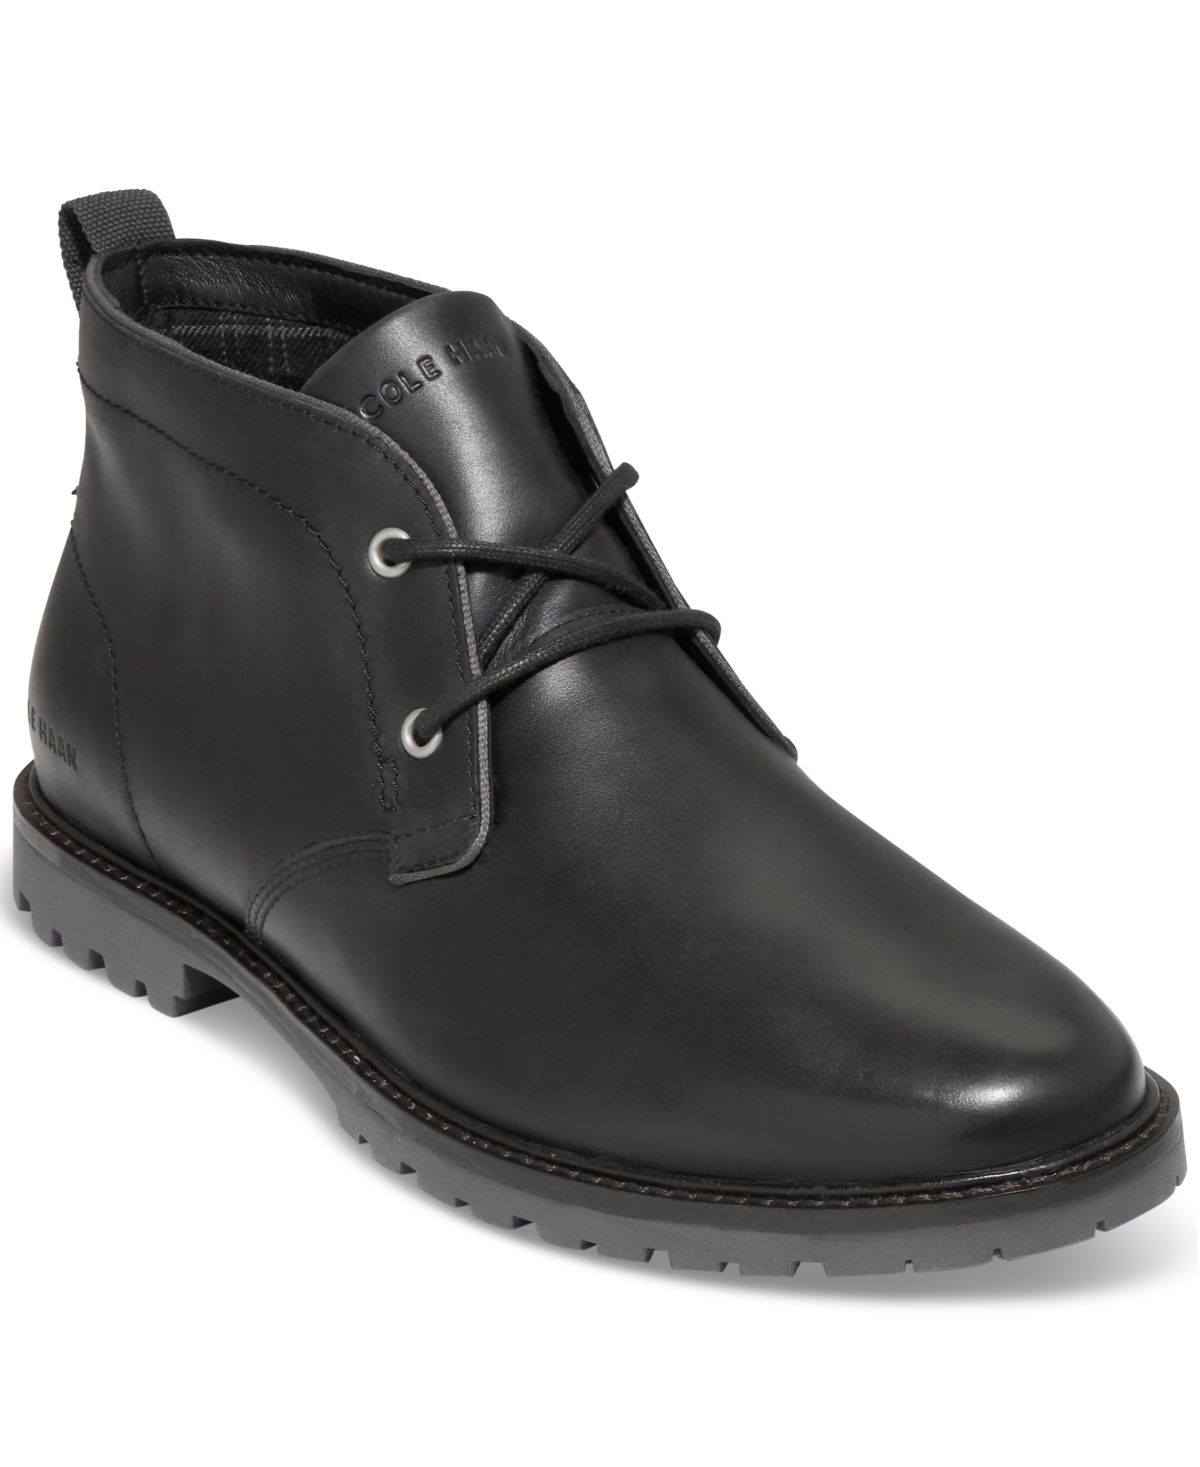 Men's Midland Leather Water-Resistant Lace-Up Lug Sole Chukka Boots - Black/grey Pinstripe Wr